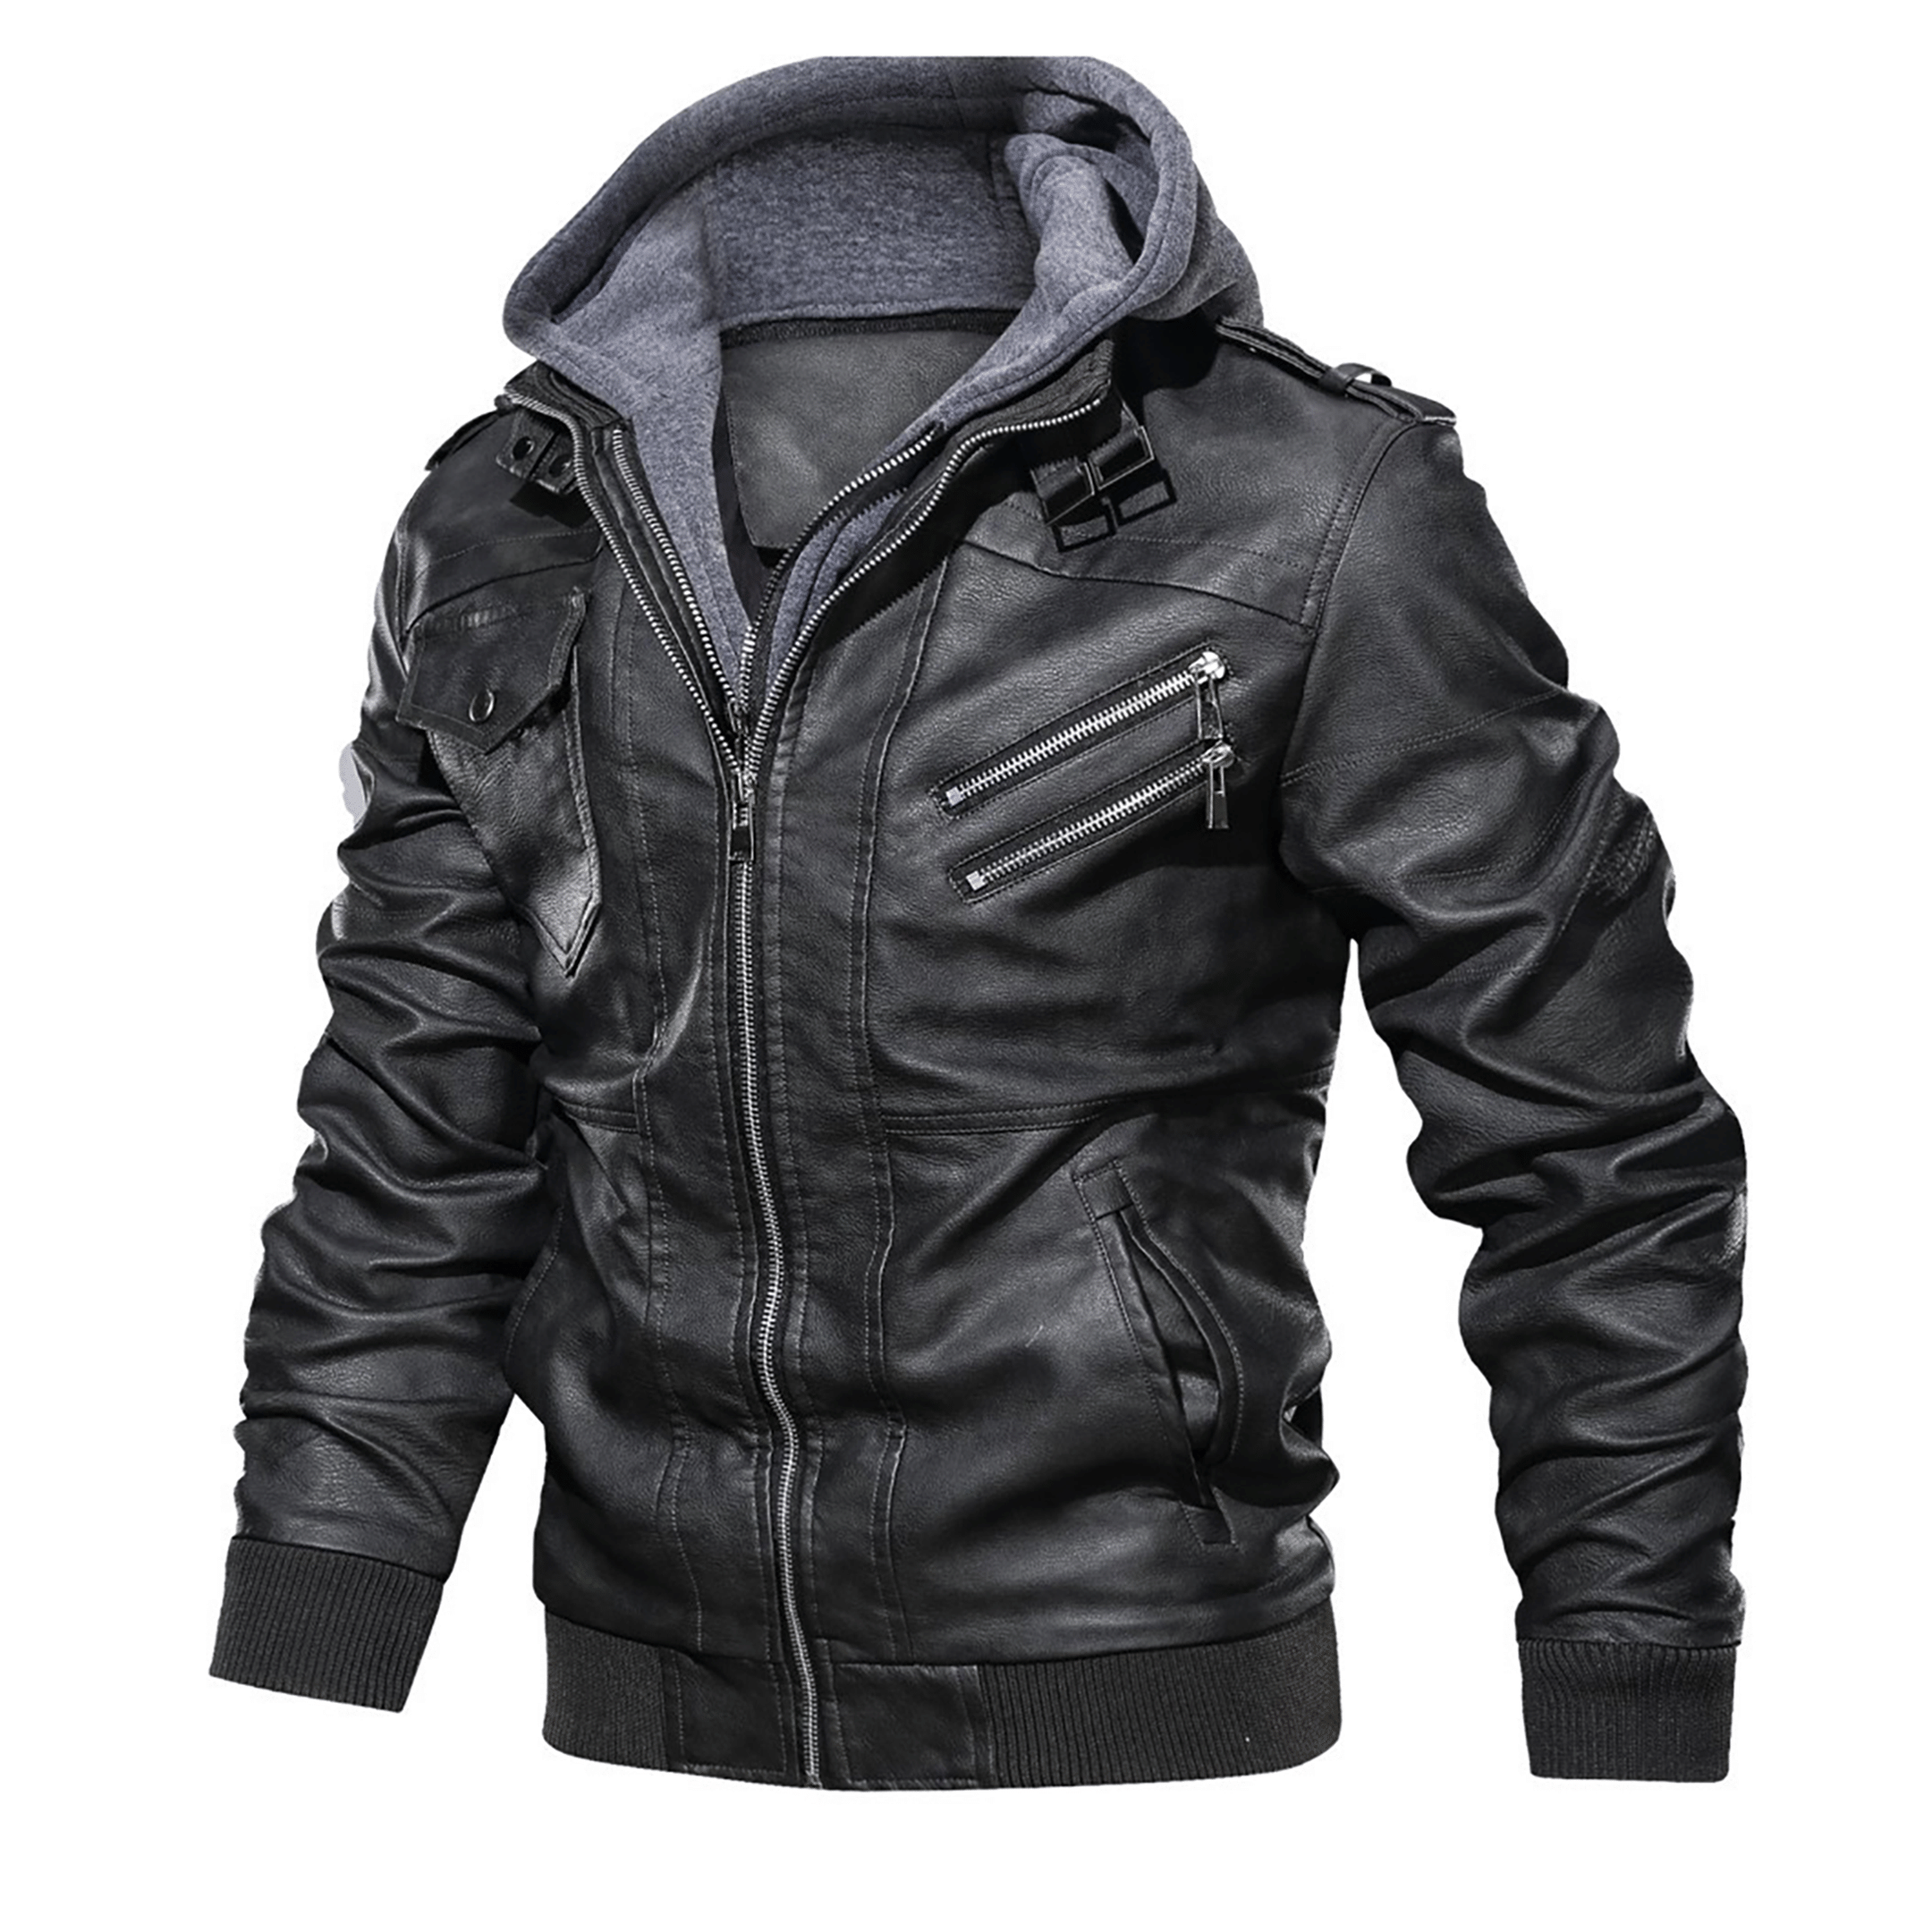 Top leather jackets and latest products 99